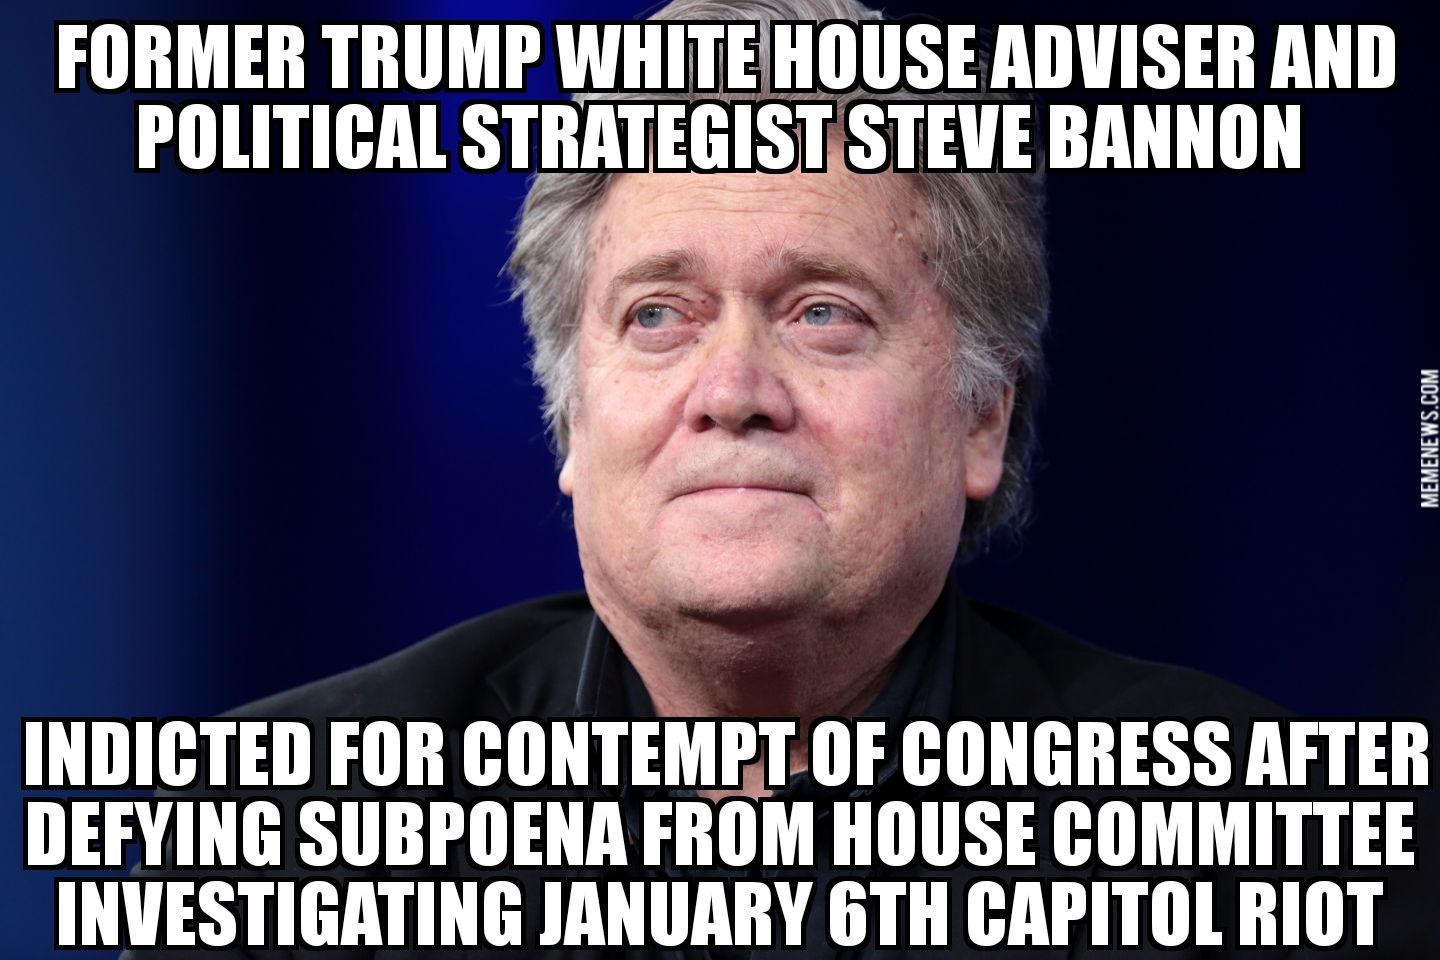 Steve Bannon indicted